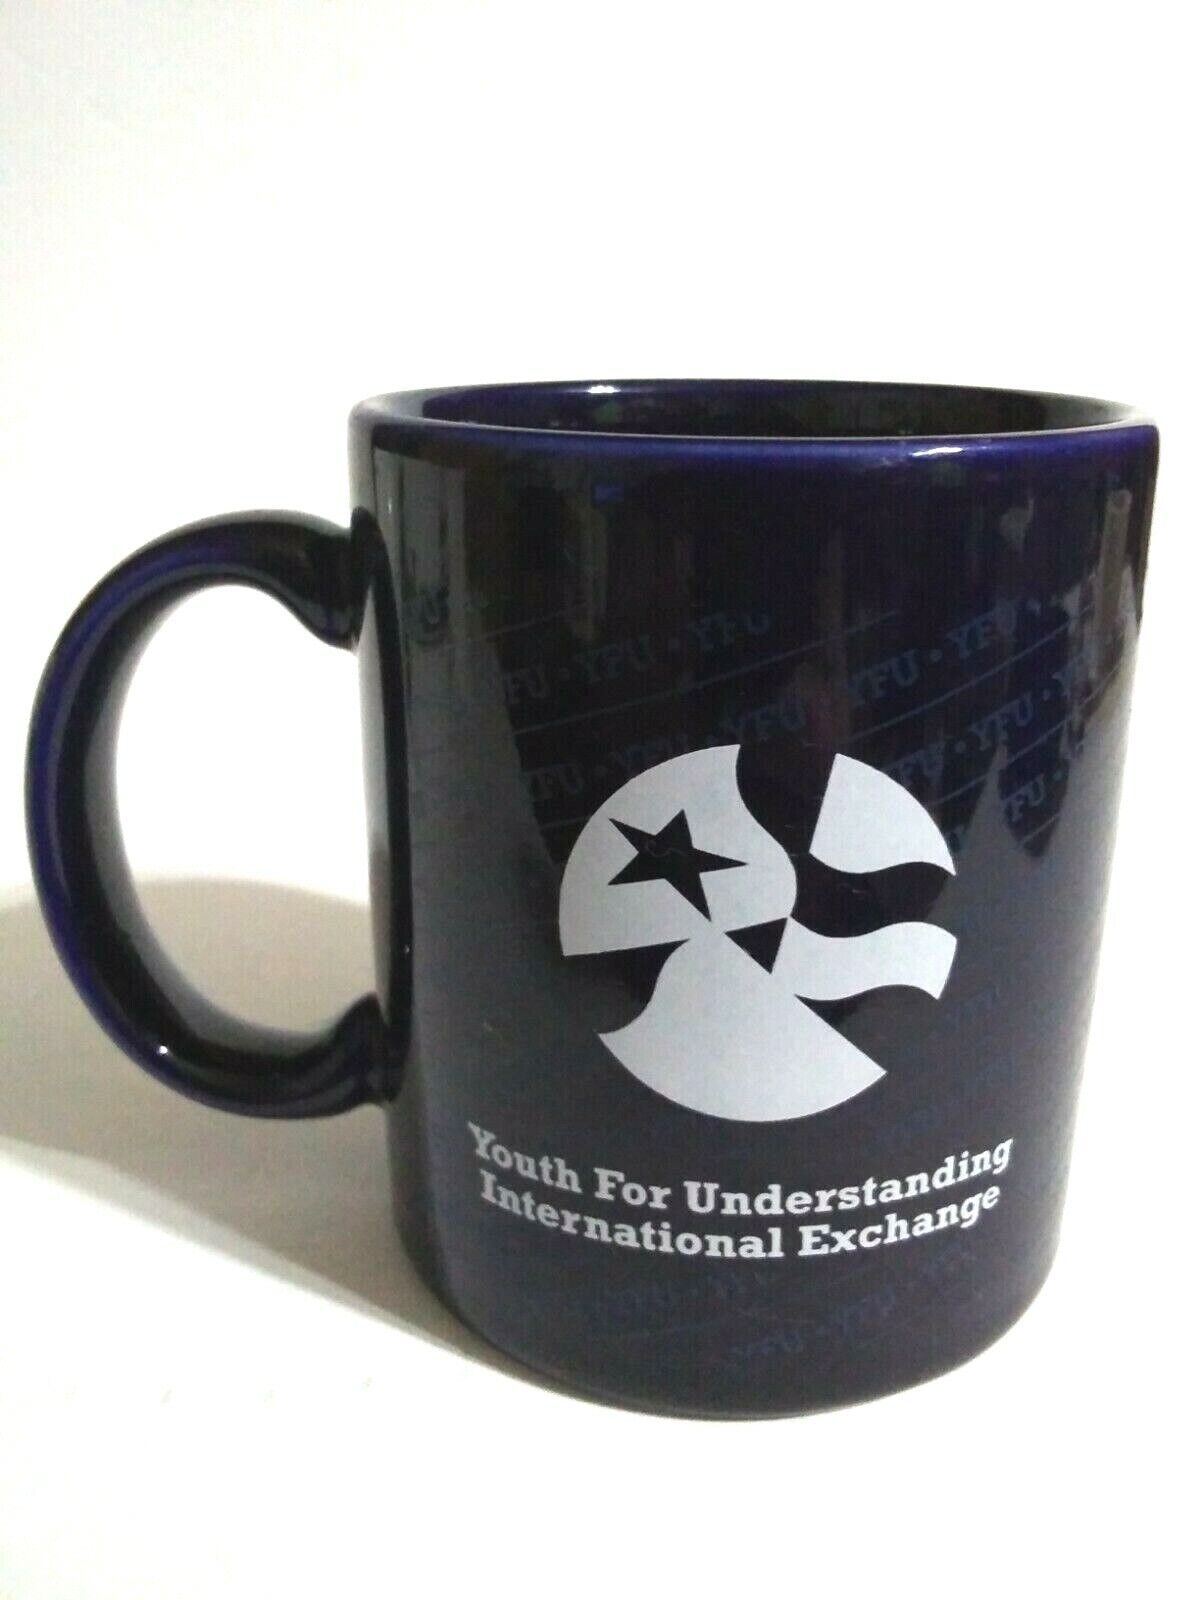 YFU Youth For Understanding And Exchange Coffee Cup Mug Blue White